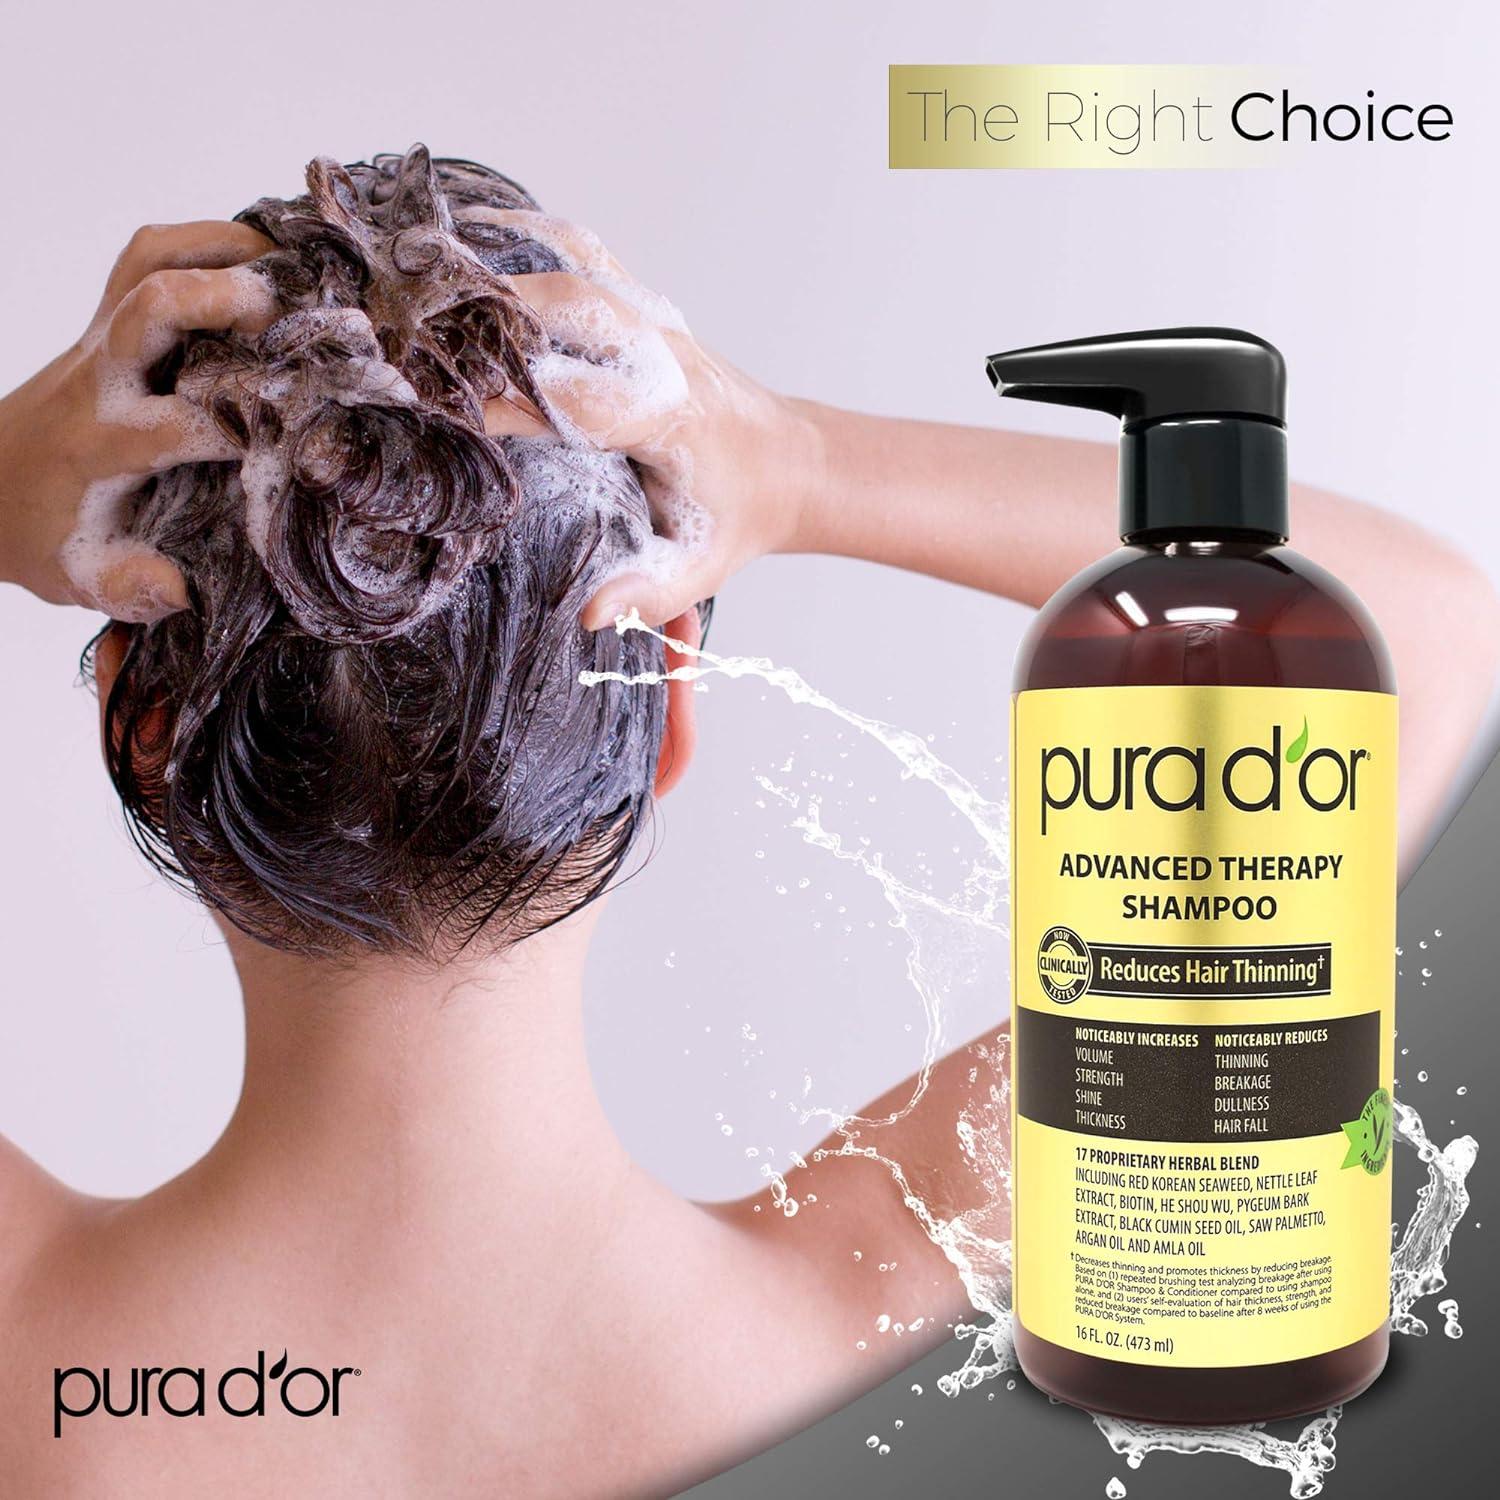 PURA D'OR Advanced Therapy Shampoo (16oz) Reduces Hair Thinning & Increases  Volume No Sulfate Biotin Shampoo Infused with Argan Oil Aloe Vera for All  Hair Types Men & Women (Packaging May Vary)